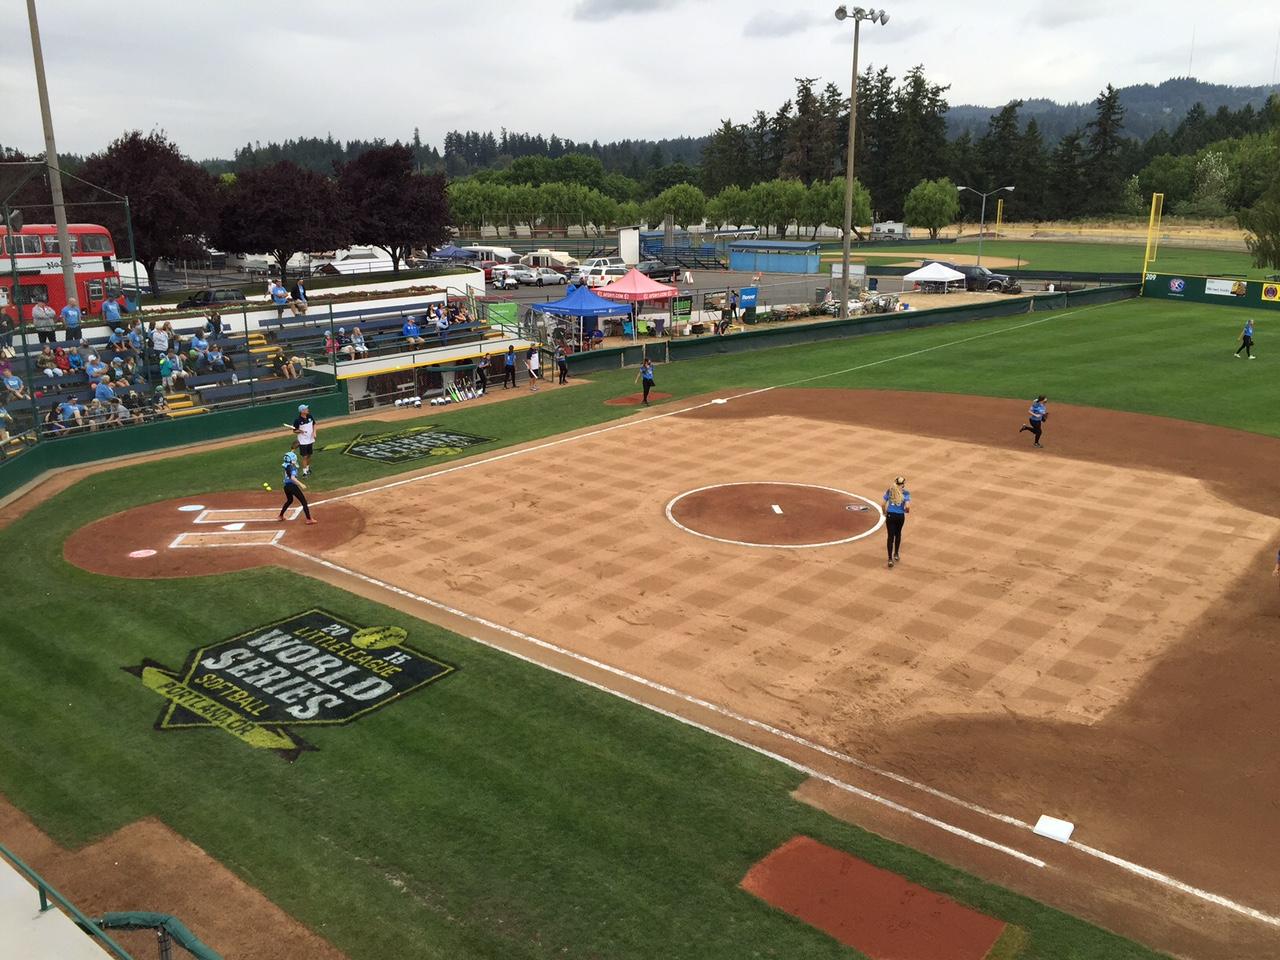 Turface Athletics was a proud sponsor of the 2015 Little League Softball World Series.